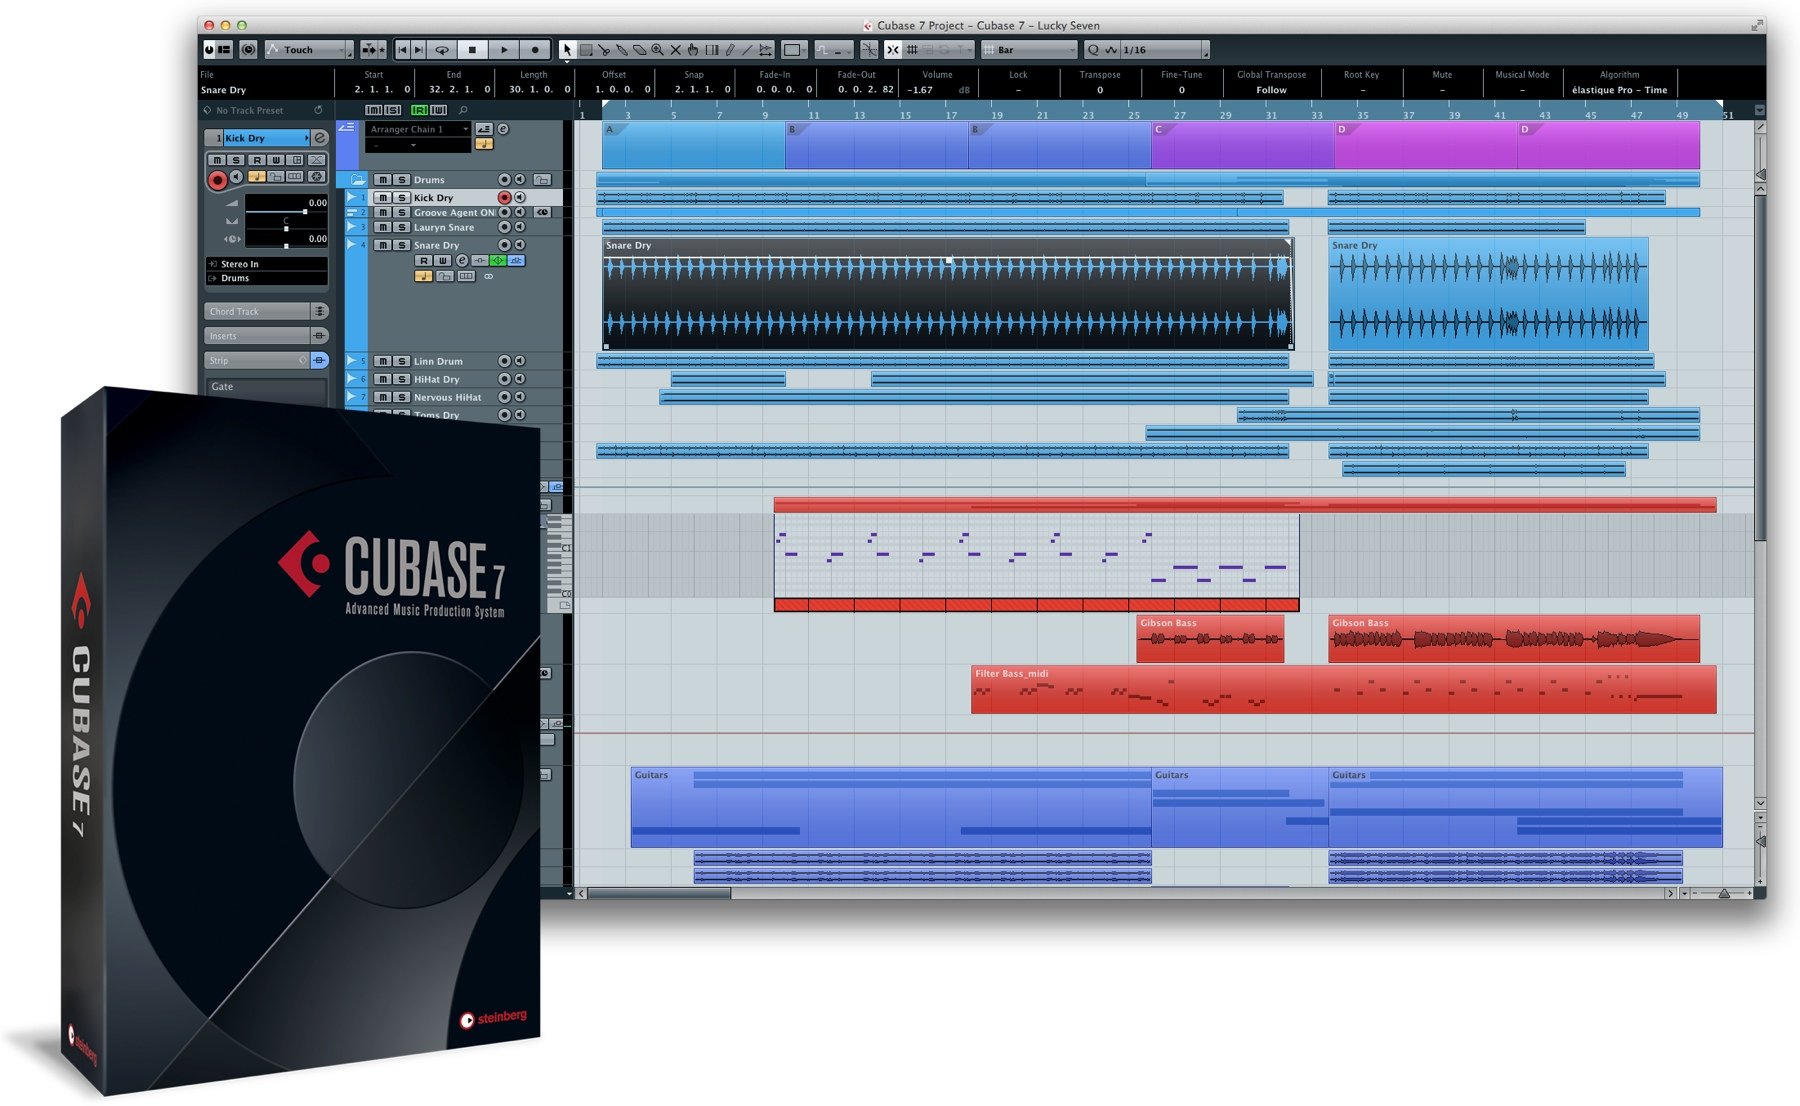 stad vers Margaret Mitchell Steinberg Cubase 7.5 - Upgrade from Cubase 6.5 (boxed) | Sweetwater